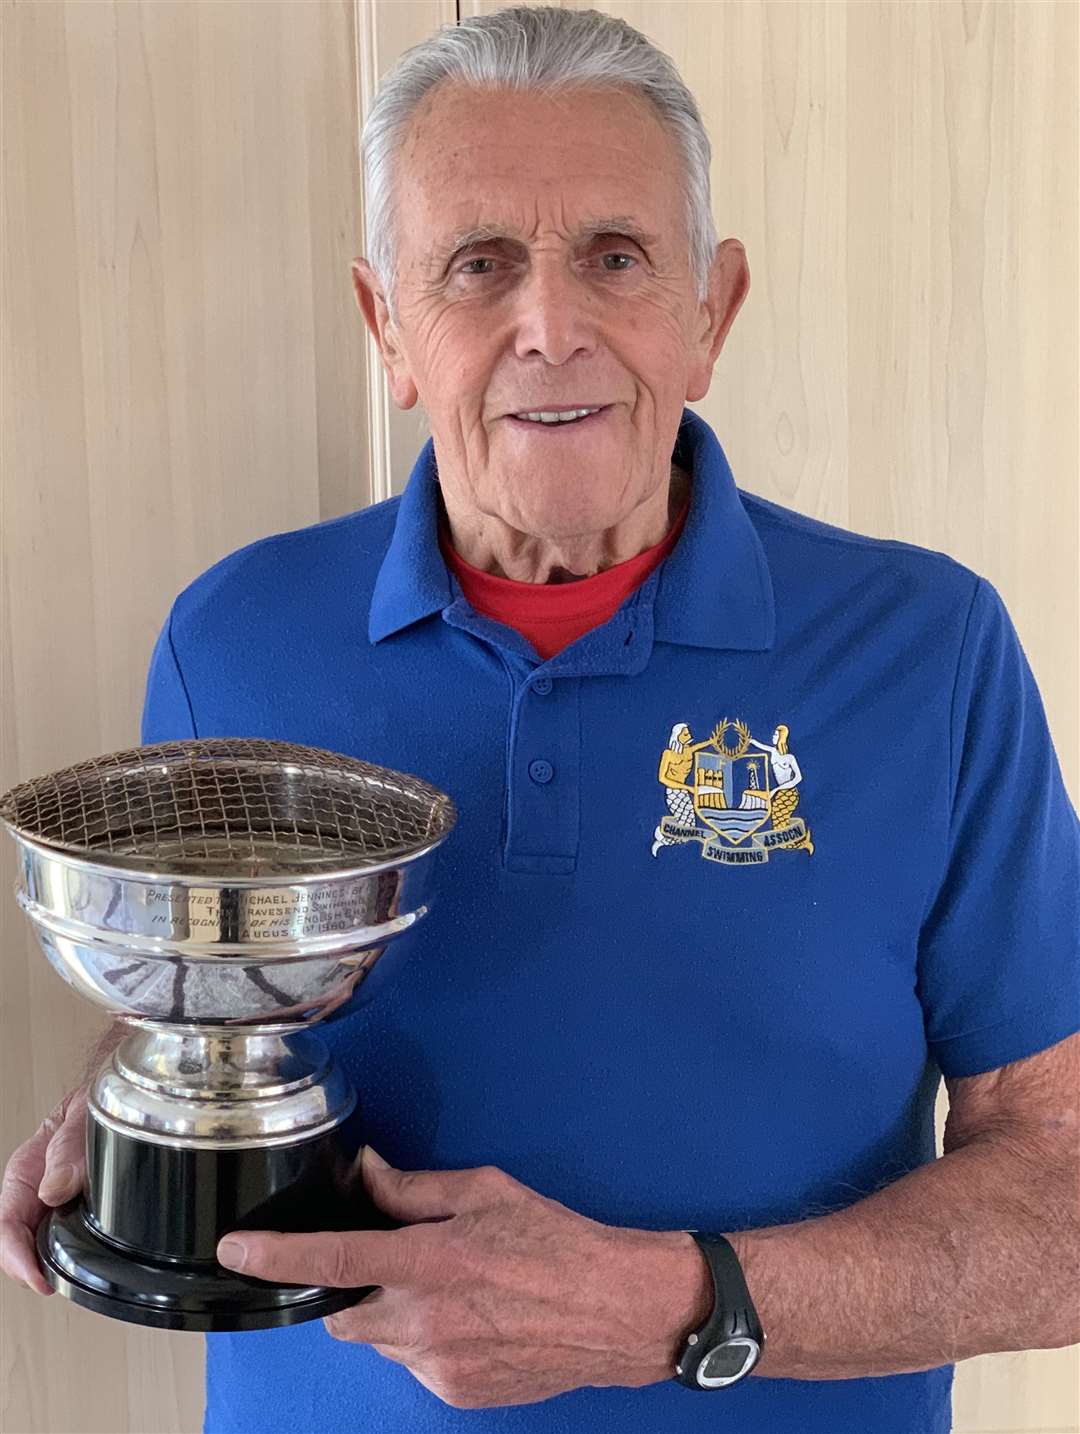 Michael, now aged 82, pictured with the trophy back at his home in Gravesend after 50 years. Picture: Michael Jennings